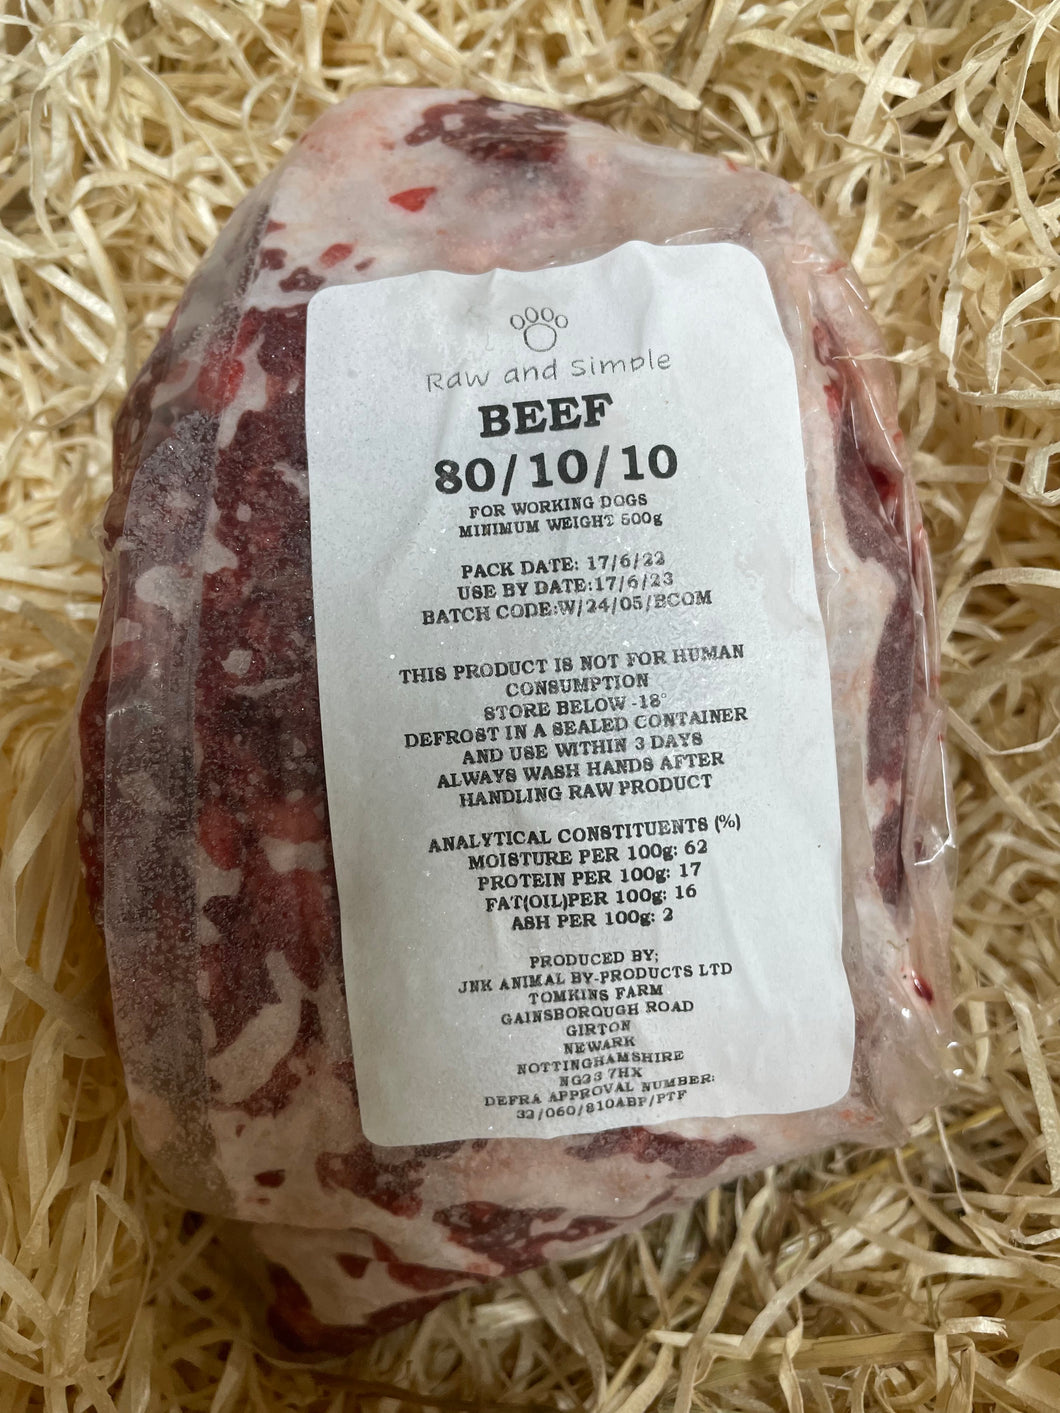 ** BRAND NEW RAW 80/10/10 ** Raw and Simple Best Beef Complete Mince 80/10/10